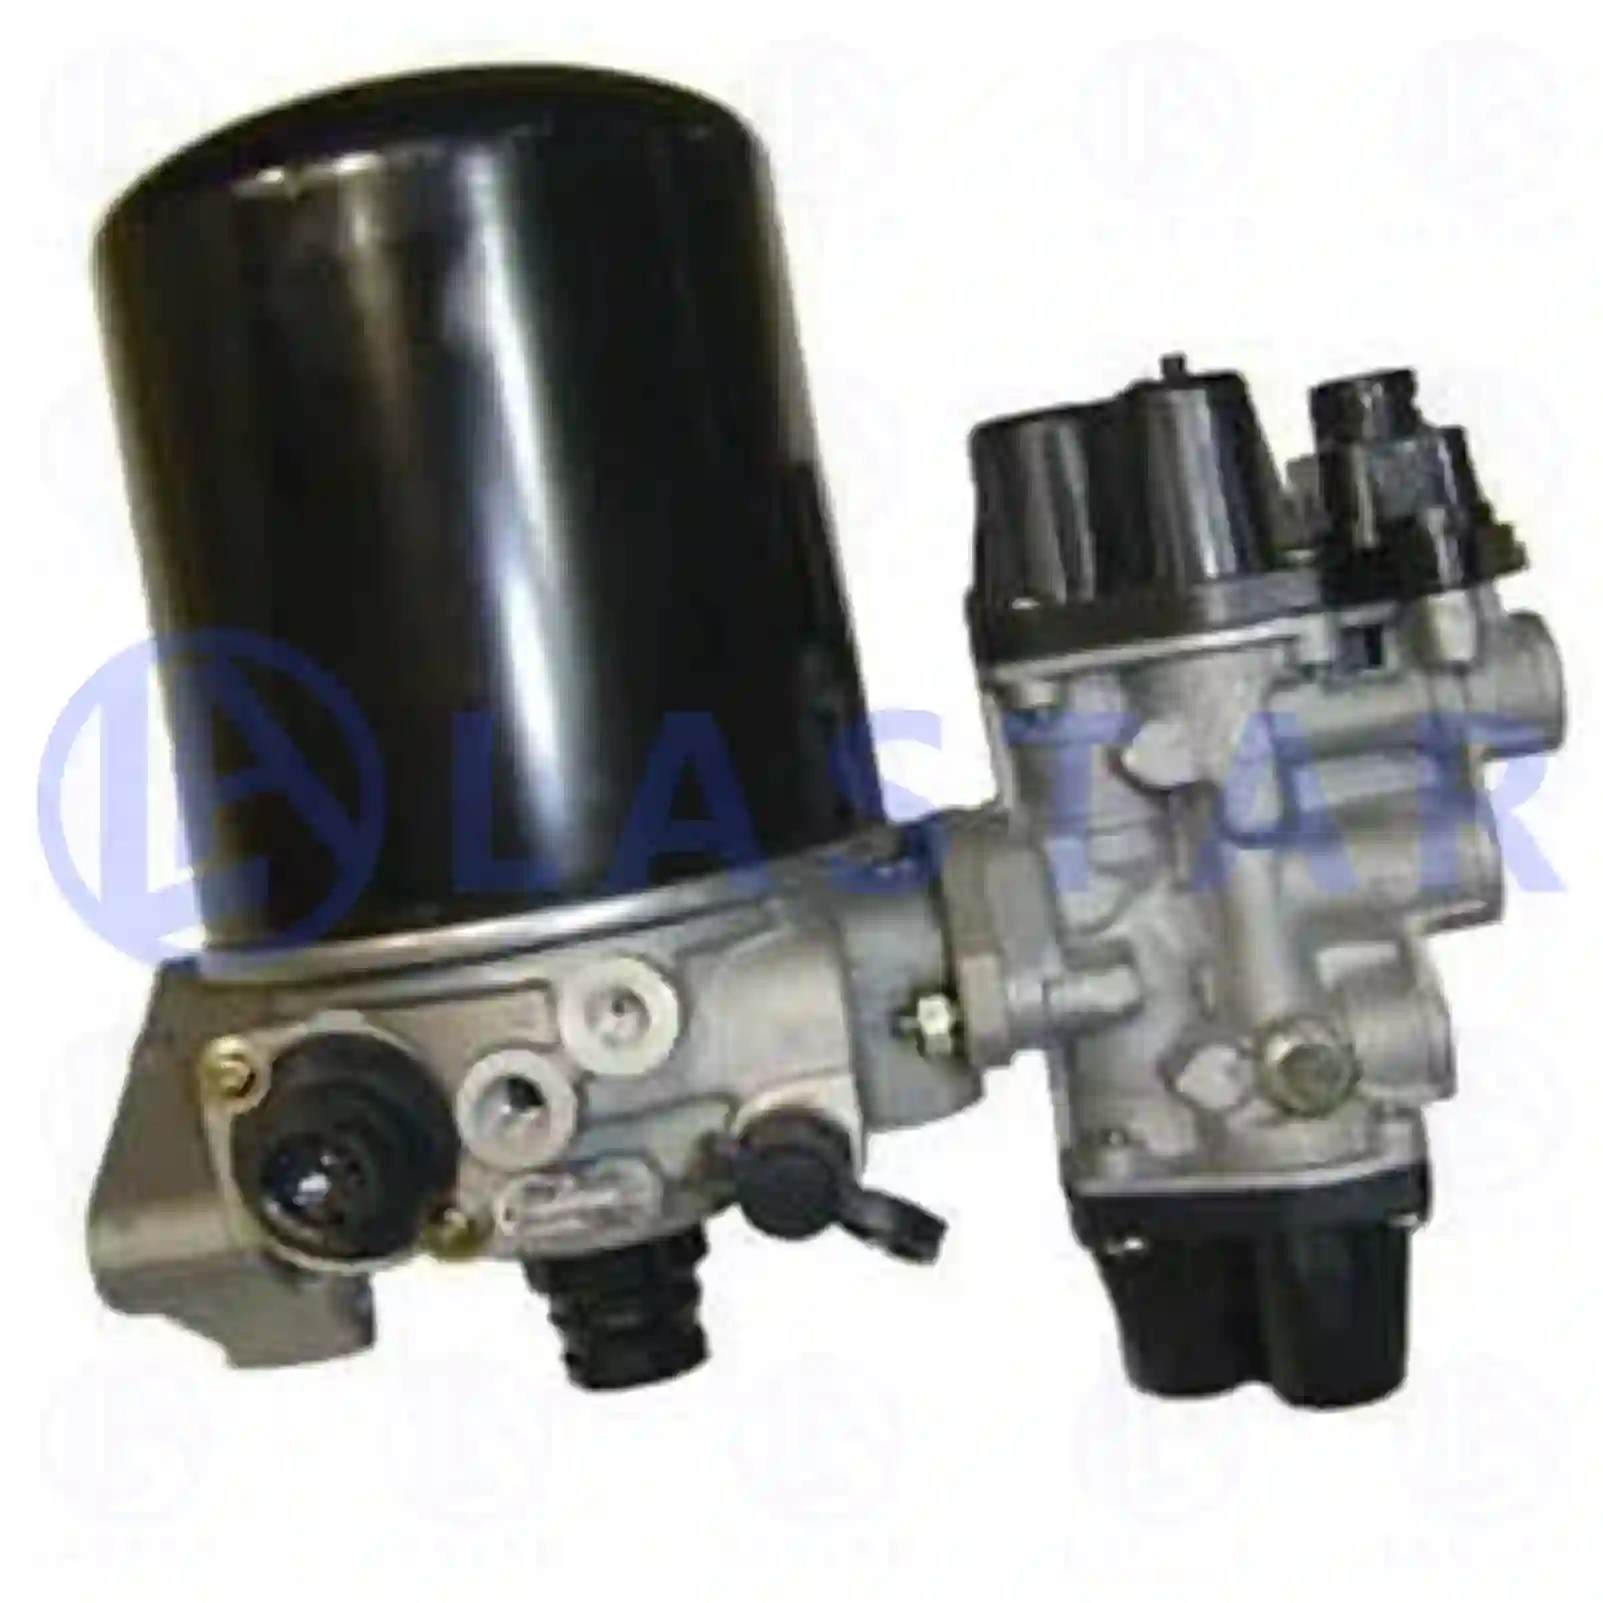 Air dryer, complete with valve, 77715128, 1505498, 0024310615, 1935483, ||  77715128 Lastar Spare Part | Truck Spare Parts, Auotomotive Spare Parts Air dryer, complete with valve, 77715128, 1505498, 0024310615, 1935483, ||  77715128 Lastar Spare Part | Truck Spare Parts, Auotomotive Spare Parts